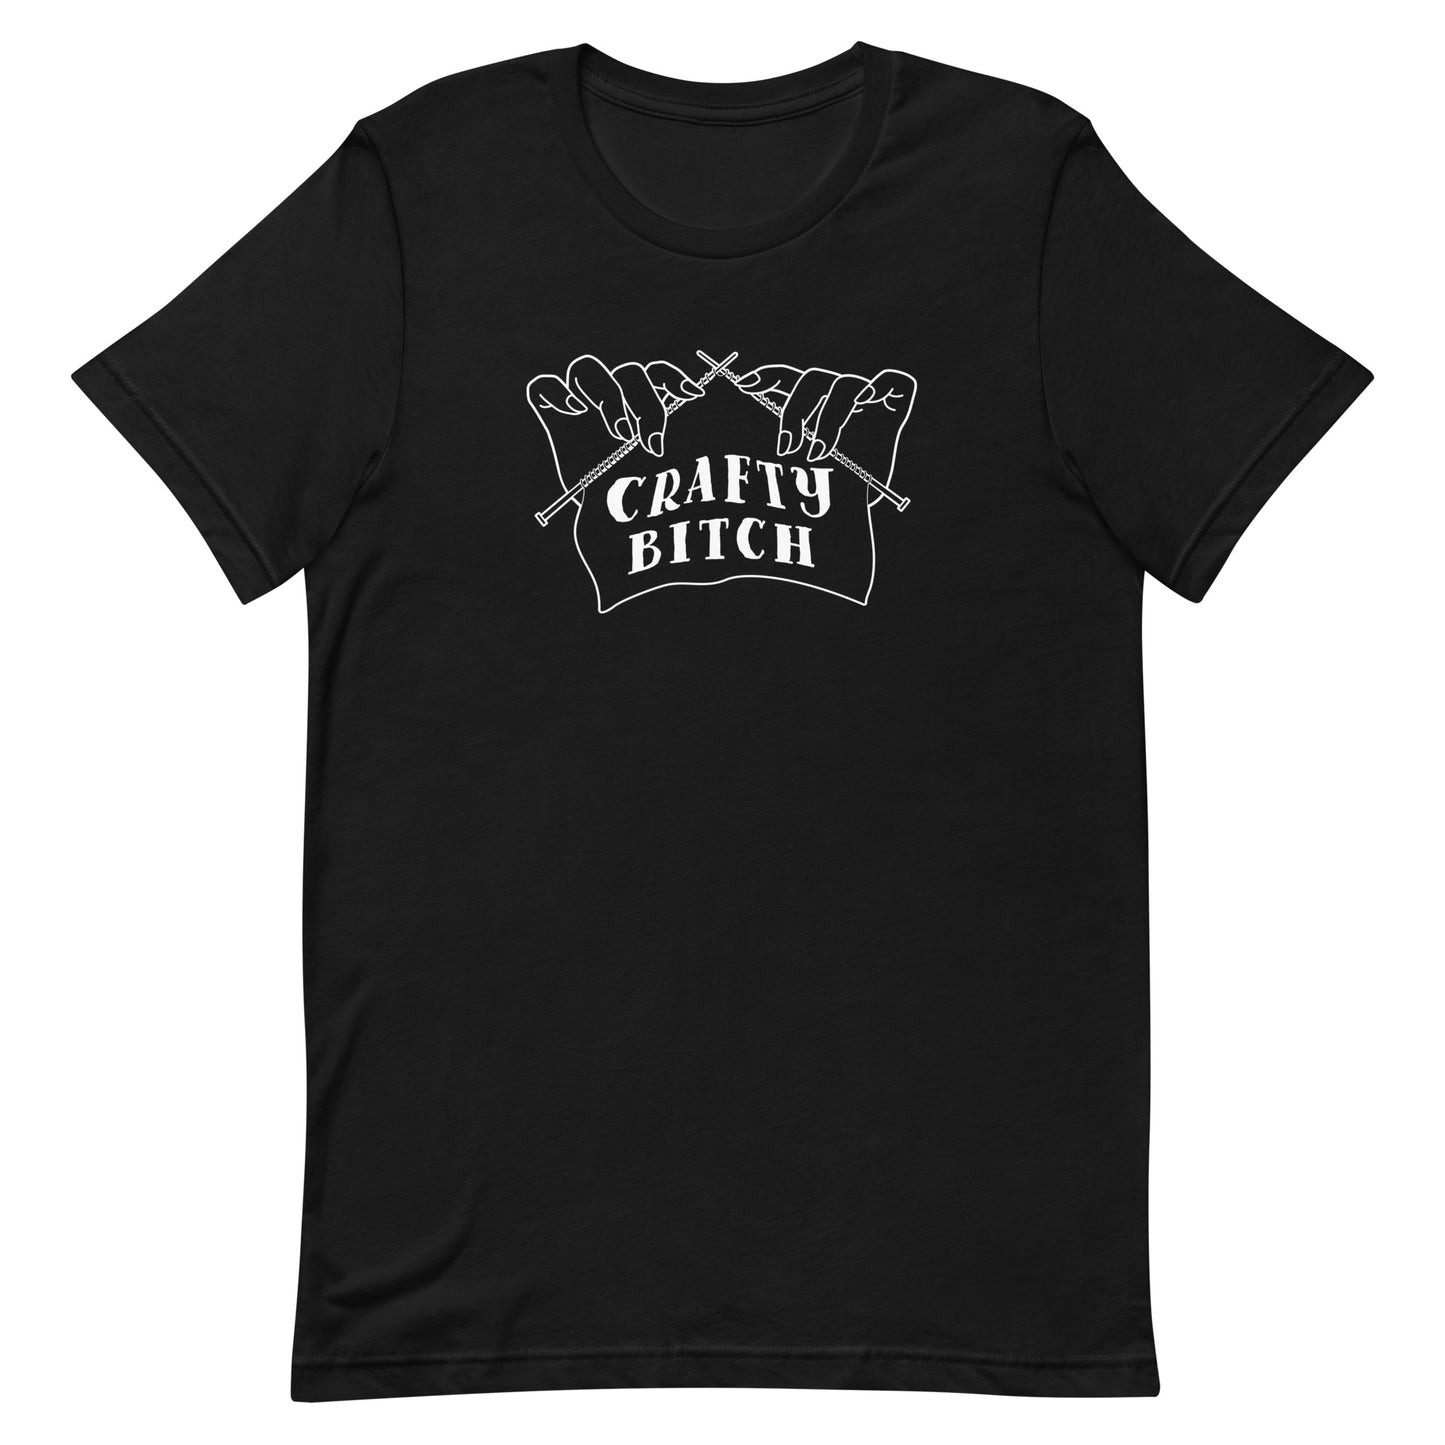 A black crewneck t-shirt featuring a single-color illustration of a pair of hands holding knitting needles. Fabric on the needles features text that reads "crafty bitch".